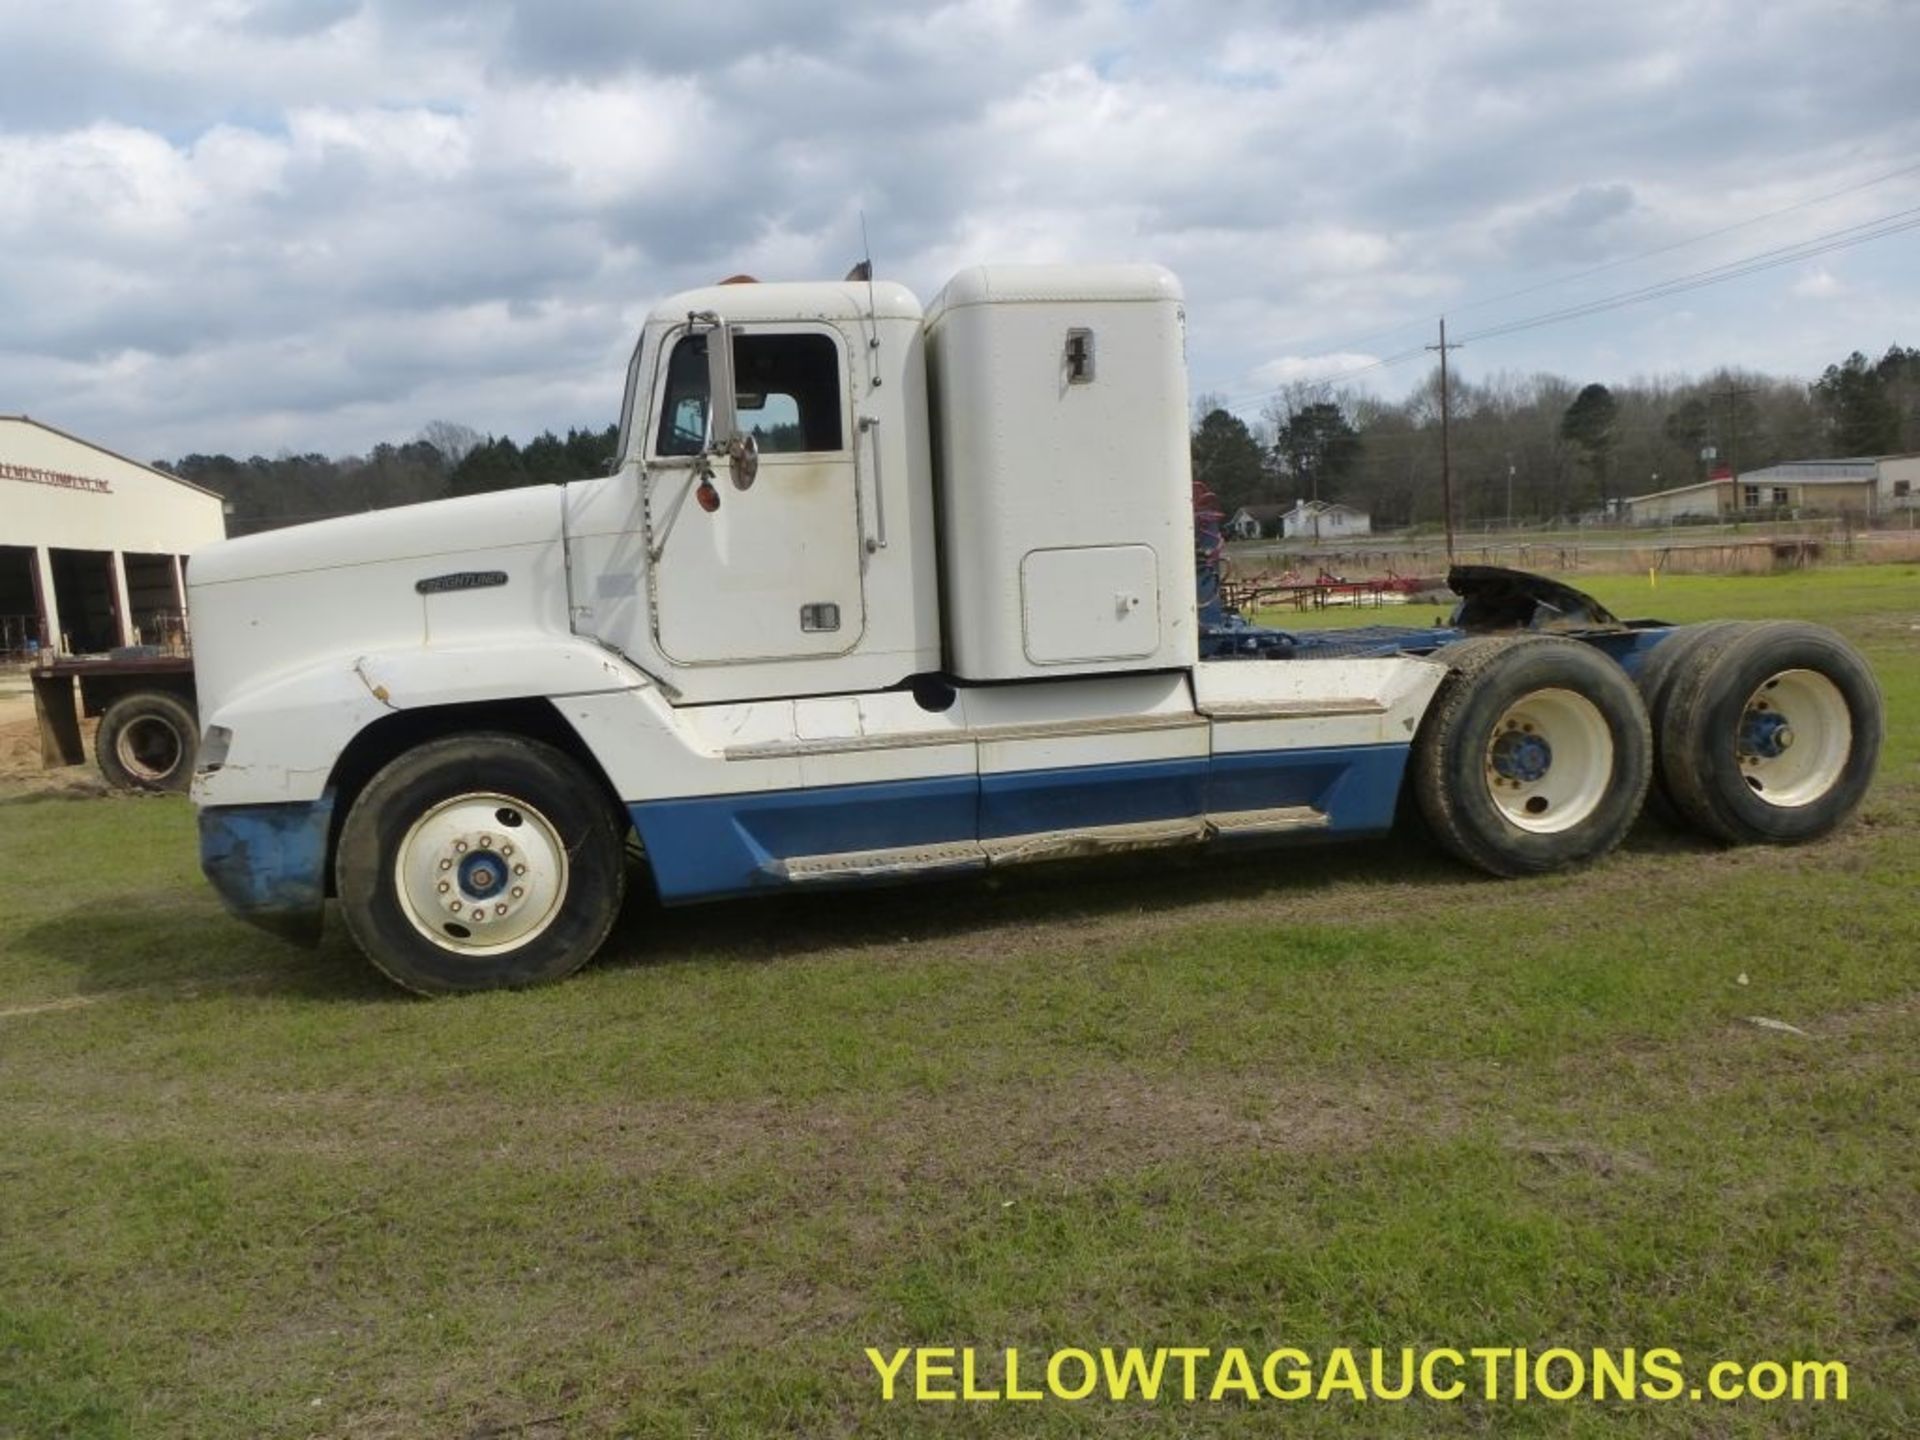 1989 Freightliner FLD 120 Truck Tractor|VIN #1FUYDCYBXKP338622;|Titled, Non-Taxable||Tag: 849 - Bild 4 aus 21